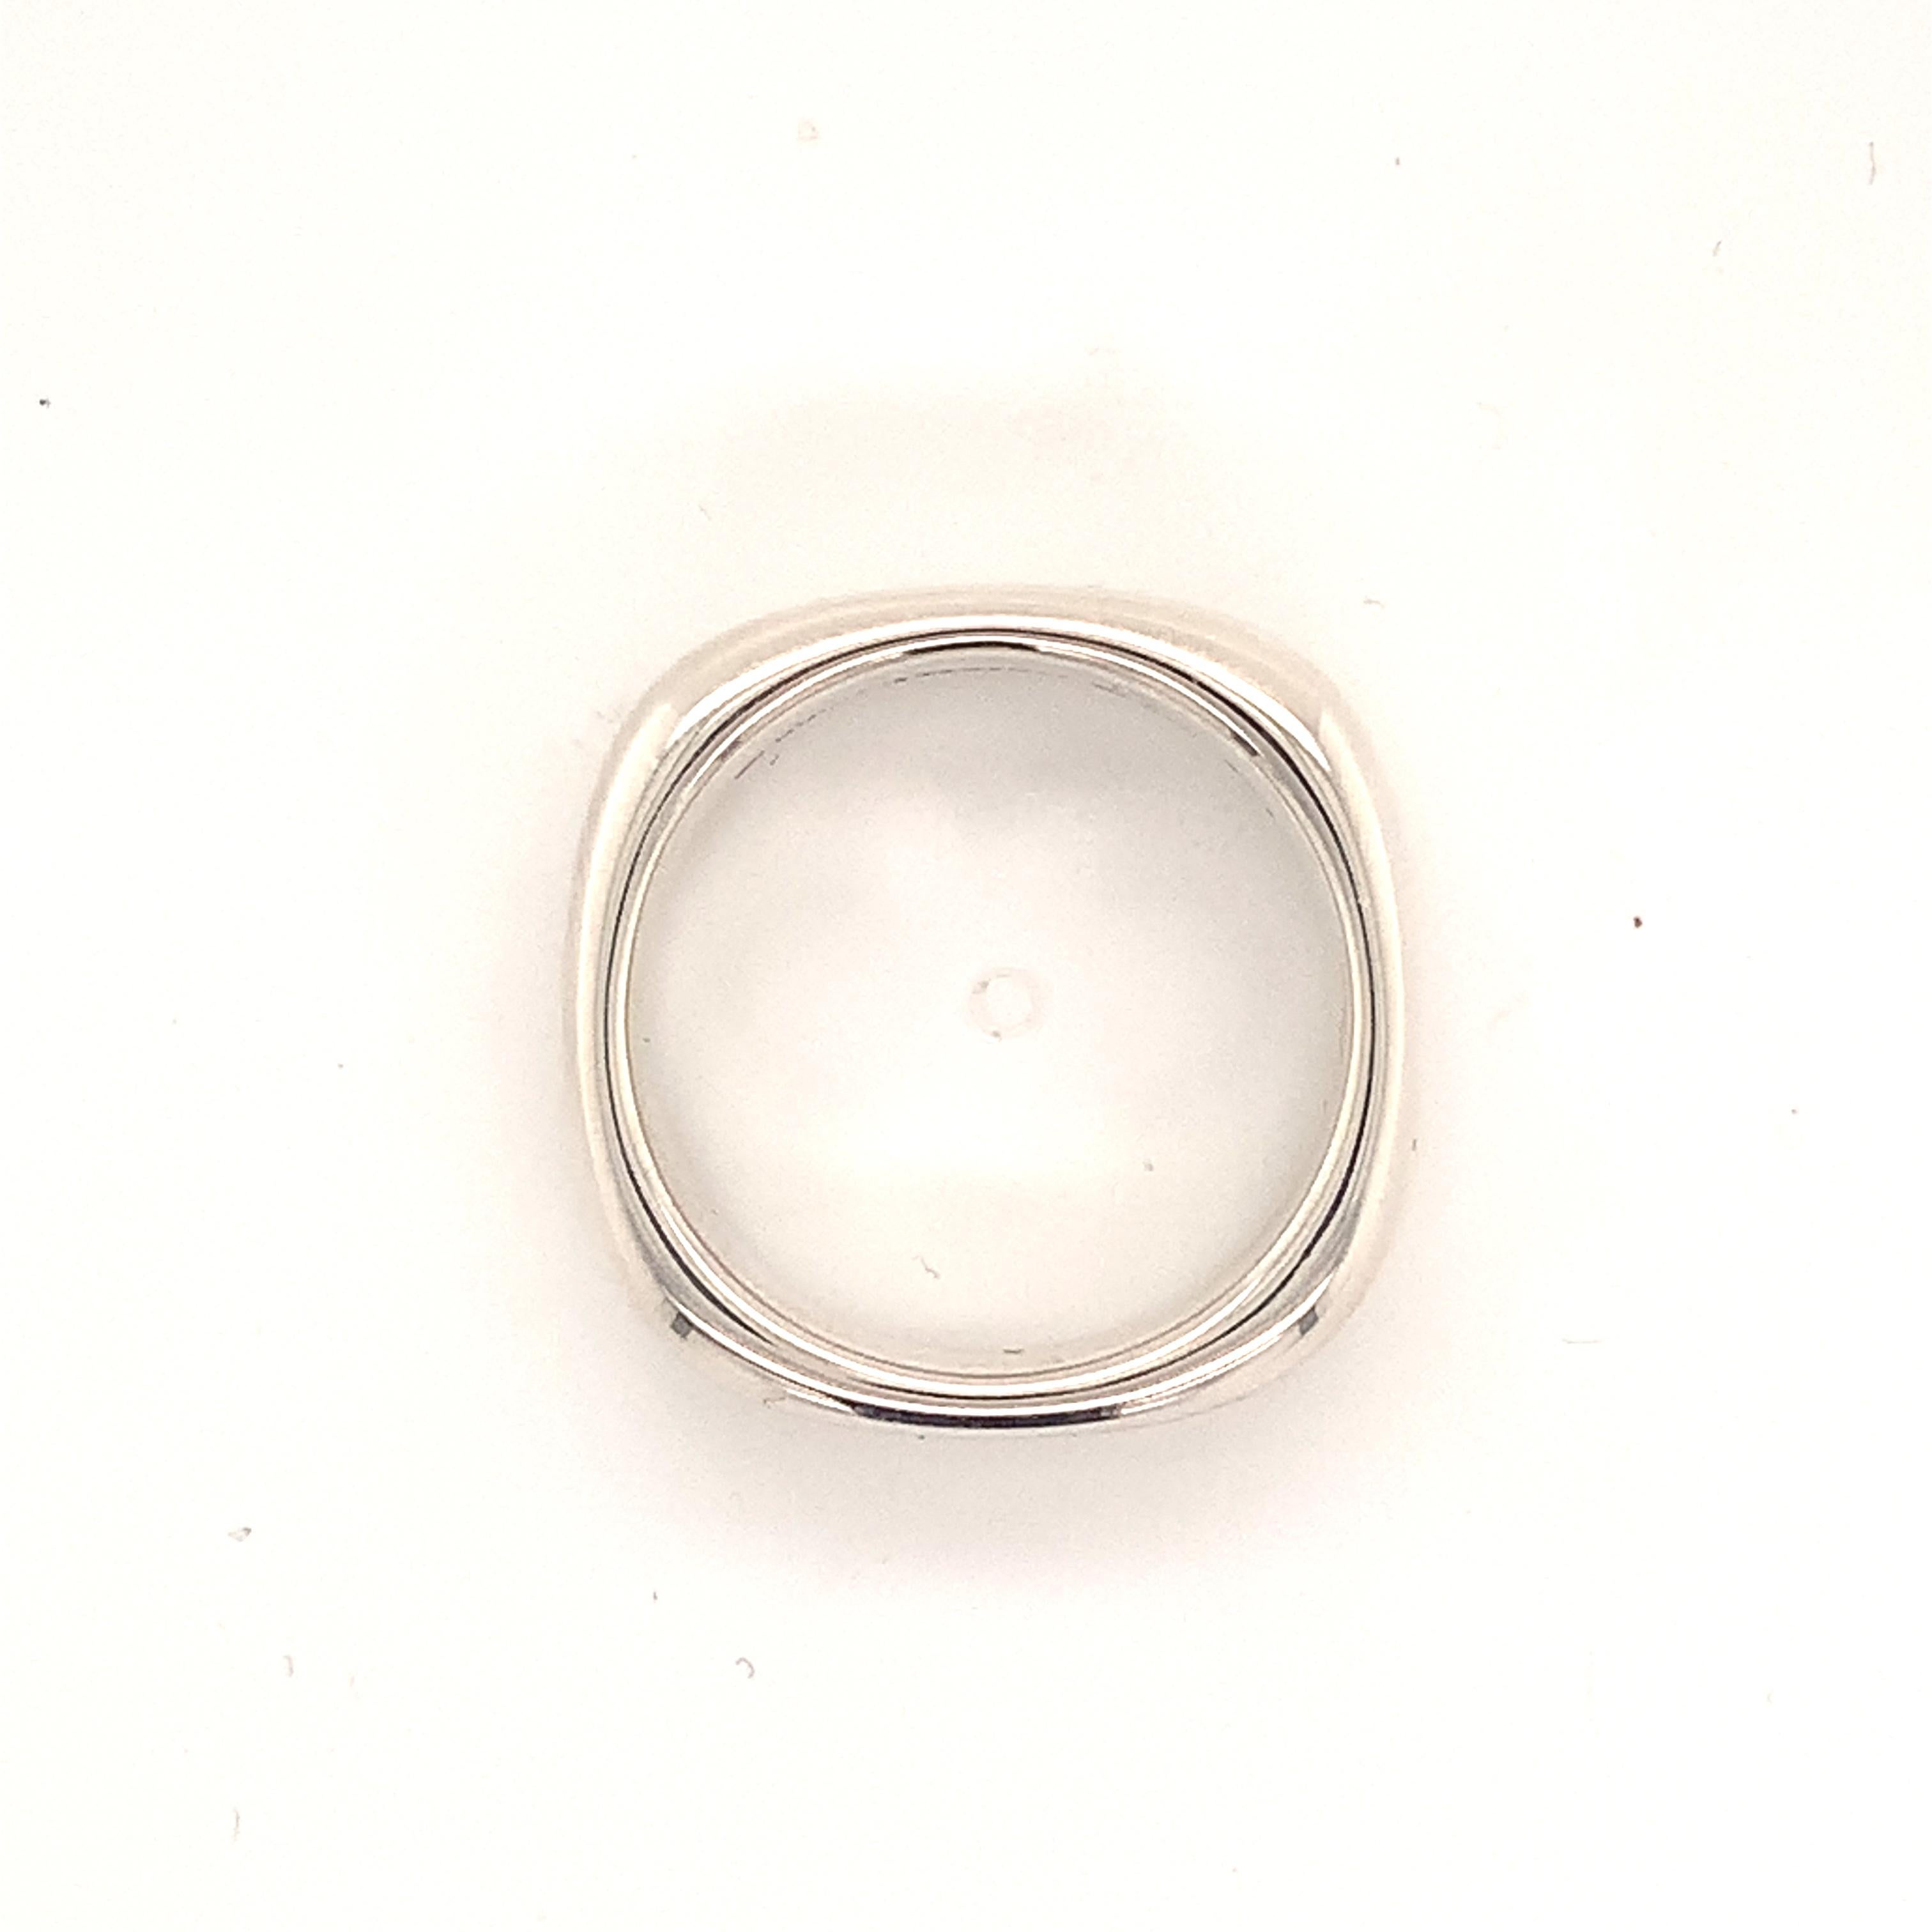 Tiffany & Co Estate Sterling Silver Men's Ring Size 9, 13.55g 8 mm Height TIF132
 
This elegant Authentic Tiffany & Co ring is made of sterling silver and has a weight of 13.55 grams.

TRUSTED SELLER SINCE 2002
 
PLEASE SEE OUR HUNDREDS OF POSITIVE